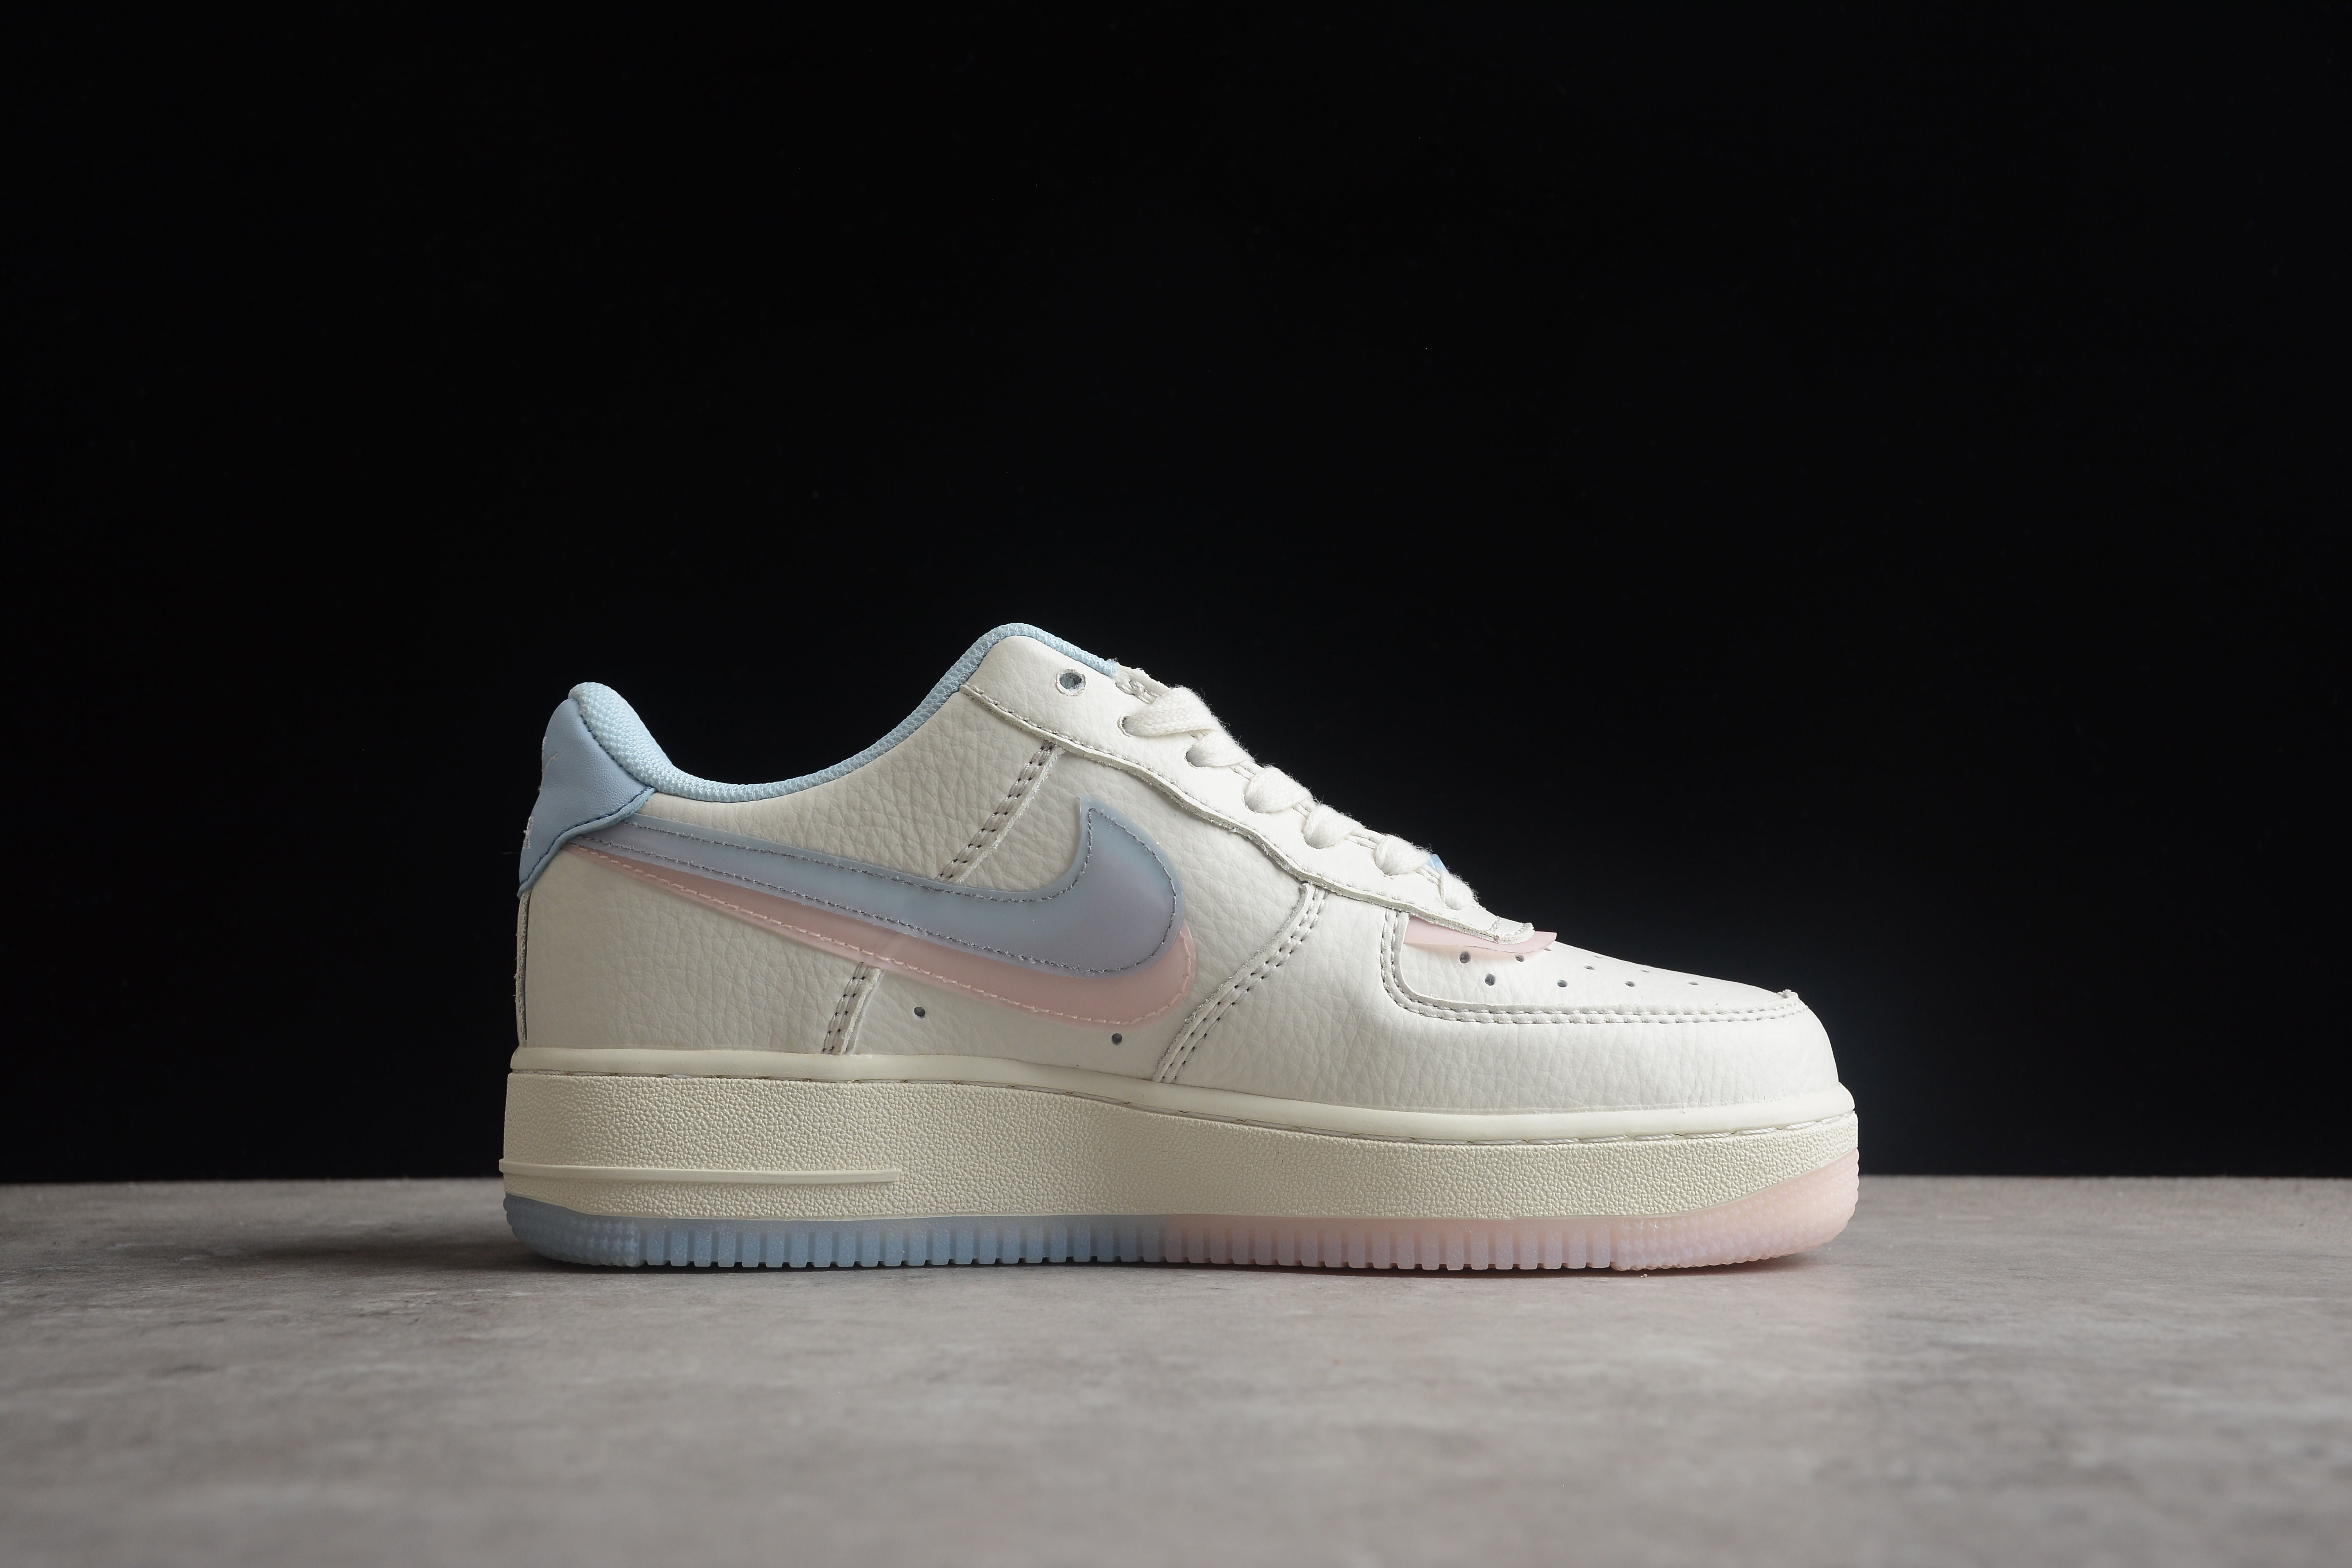 Nike airforce A1 candy shoes